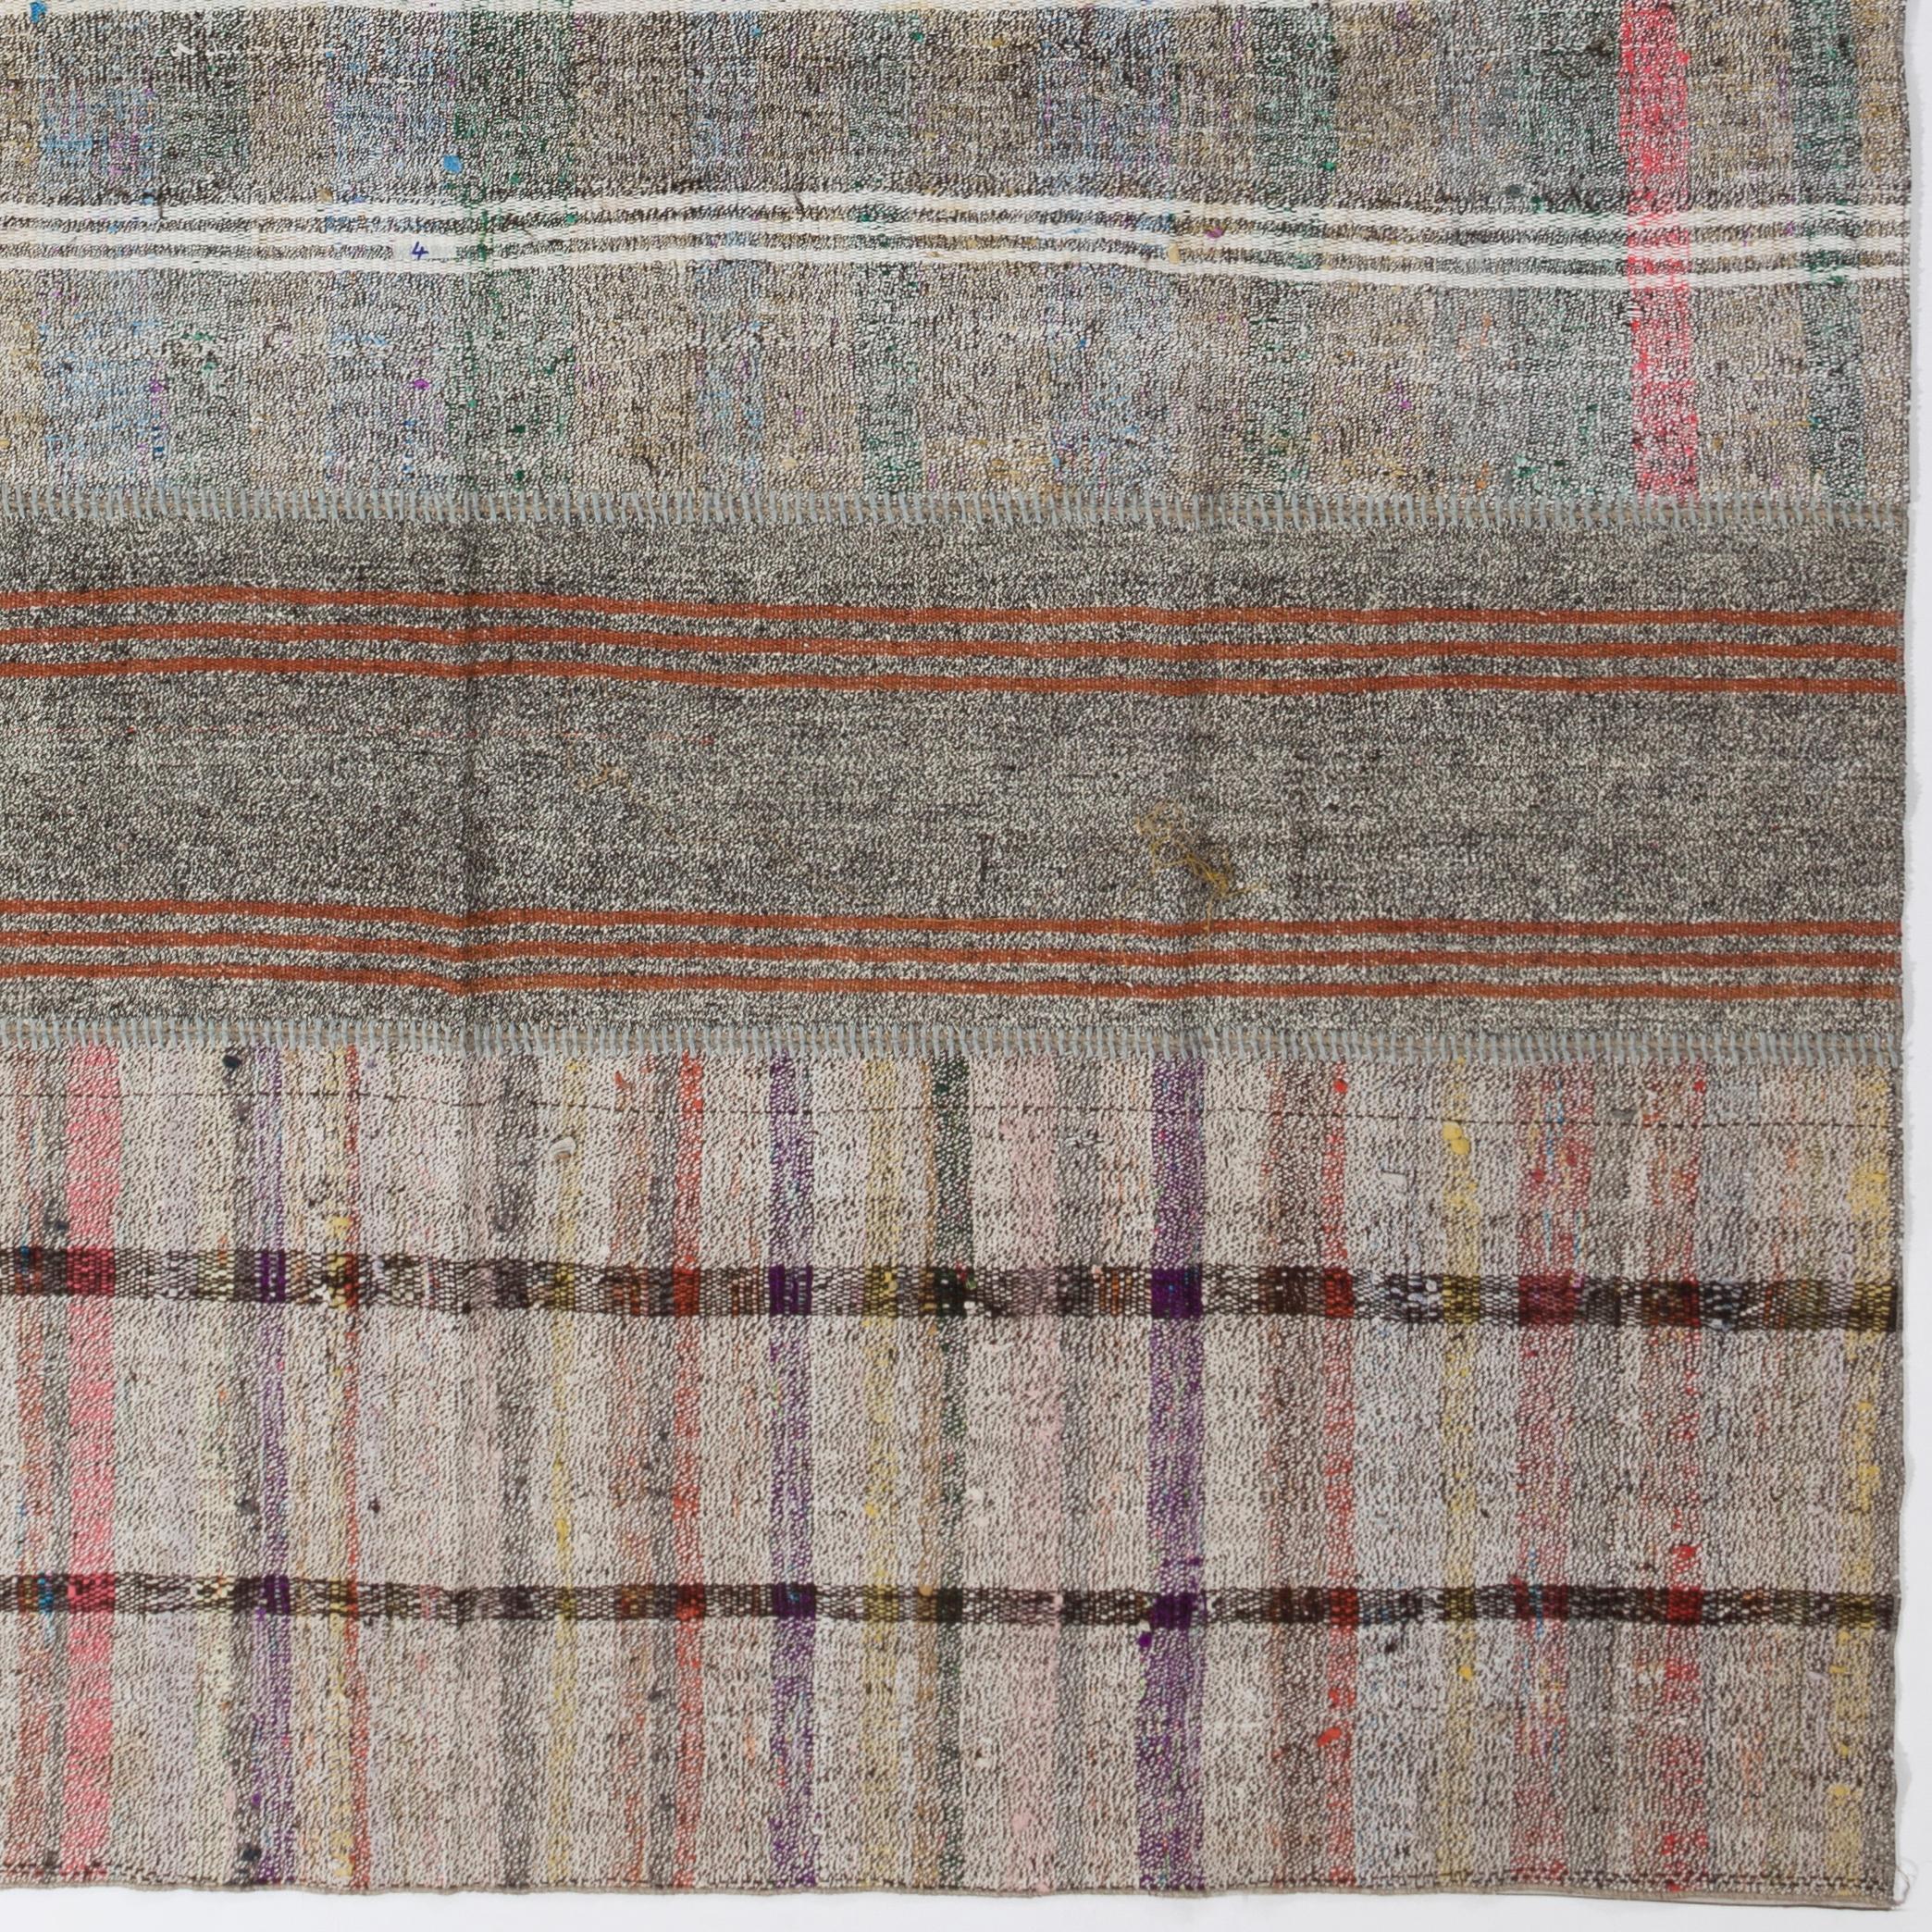 20th Century 7.8x12.3 ft Vintage Nomadic Hand-Woven Cotton and Goat Hair Turkish Kilim Rug For Sale